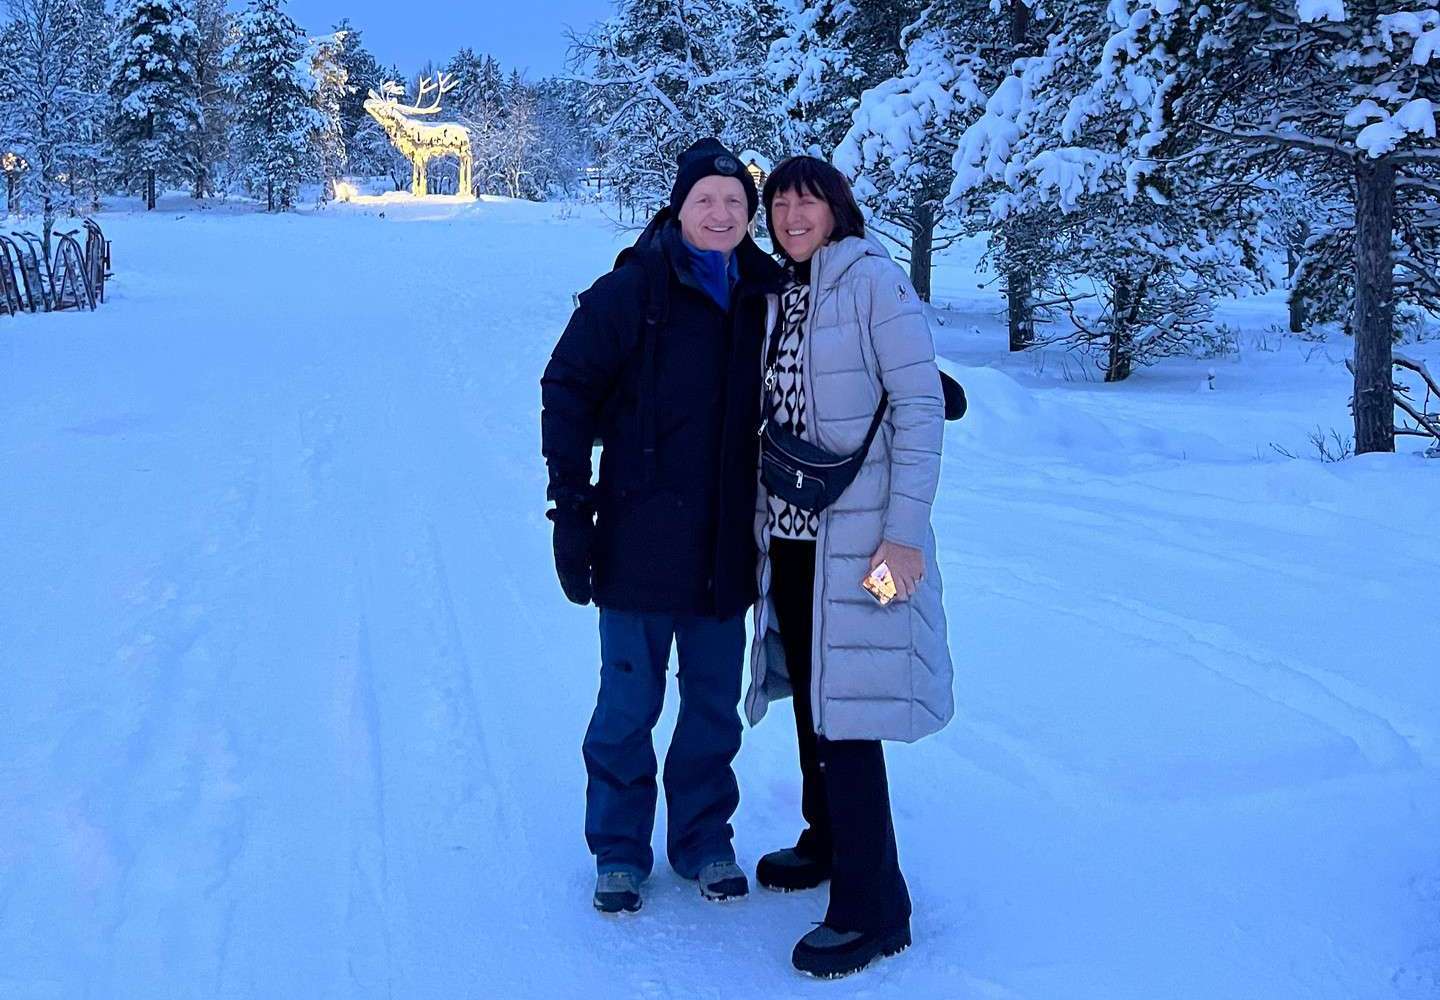 Mom and dad on the snow in Saariselka, Finland. Frozen karting & husky rides